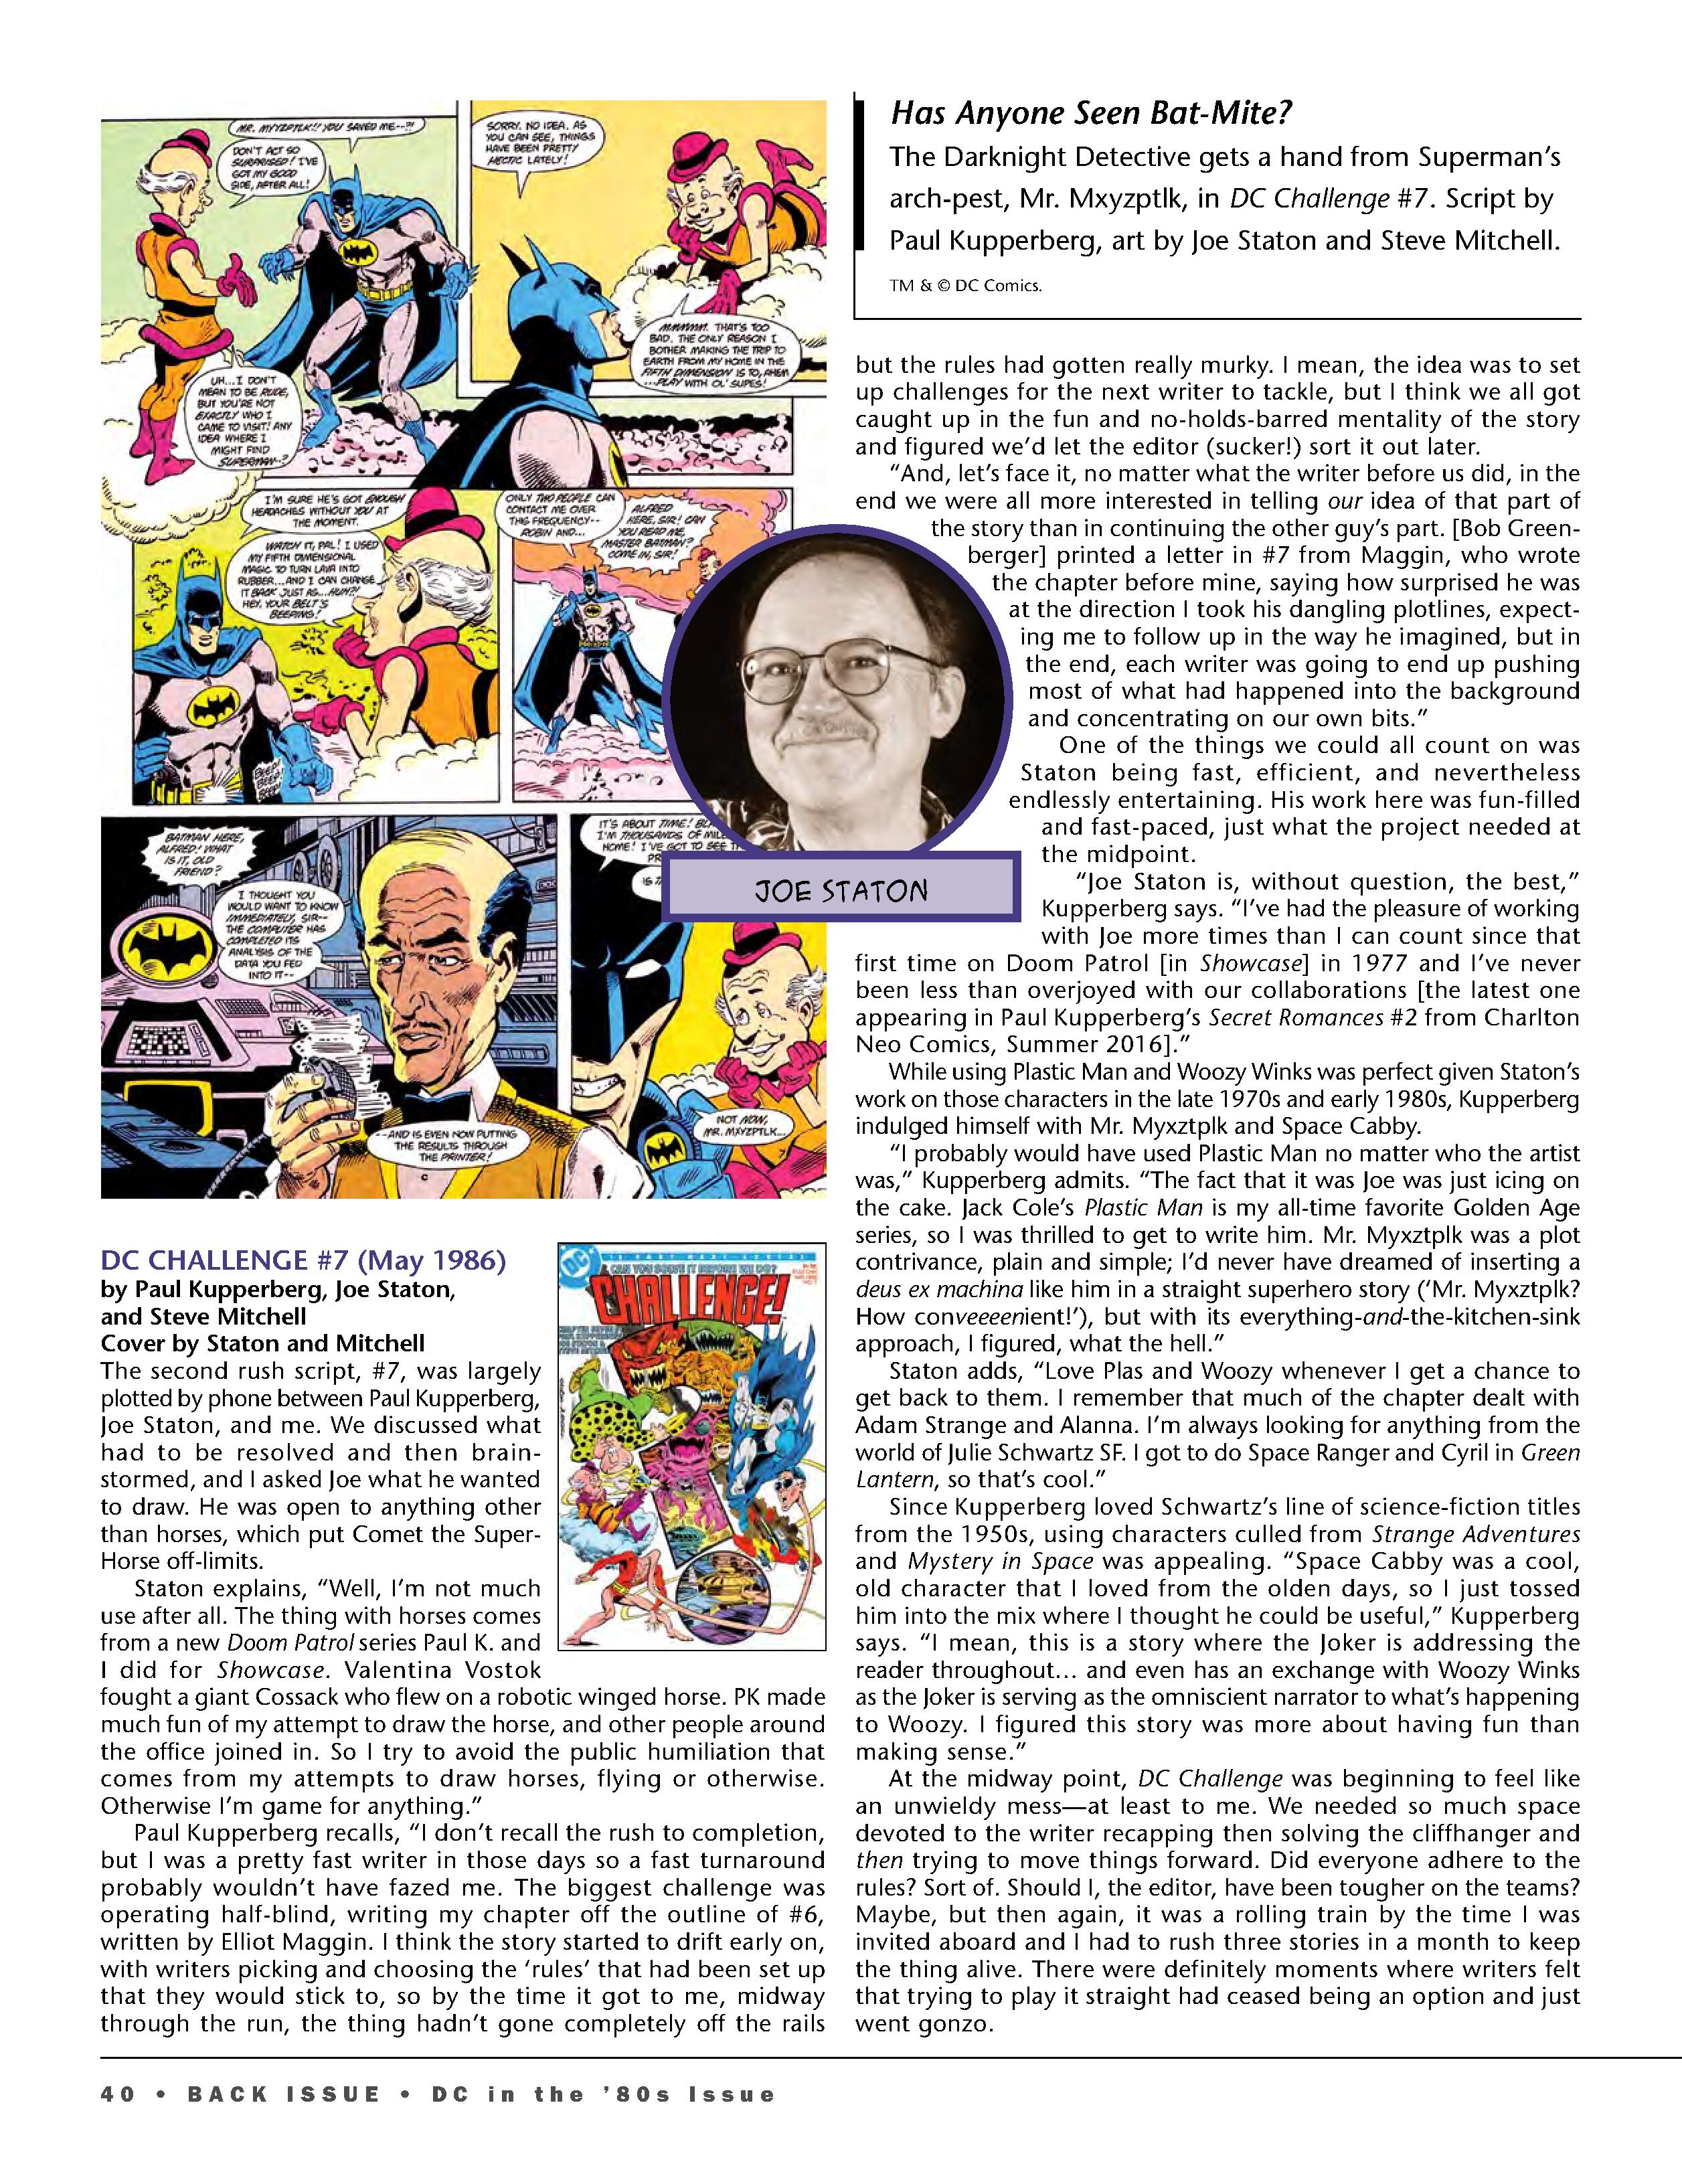 Read online Back Issue comic -  Issue #98 - 42